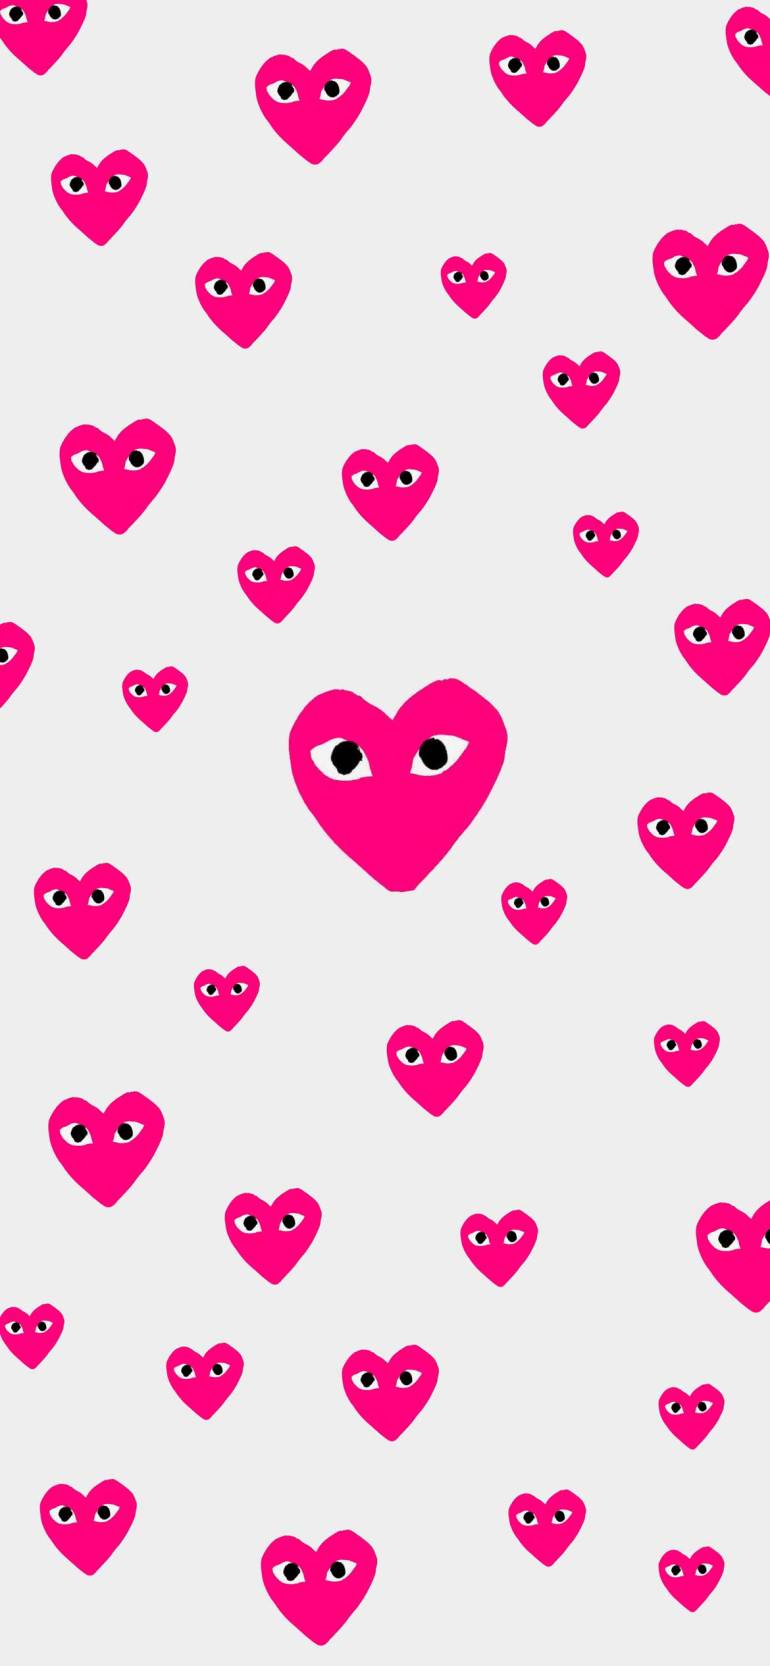 Aesthetic Hearts Wallpapers